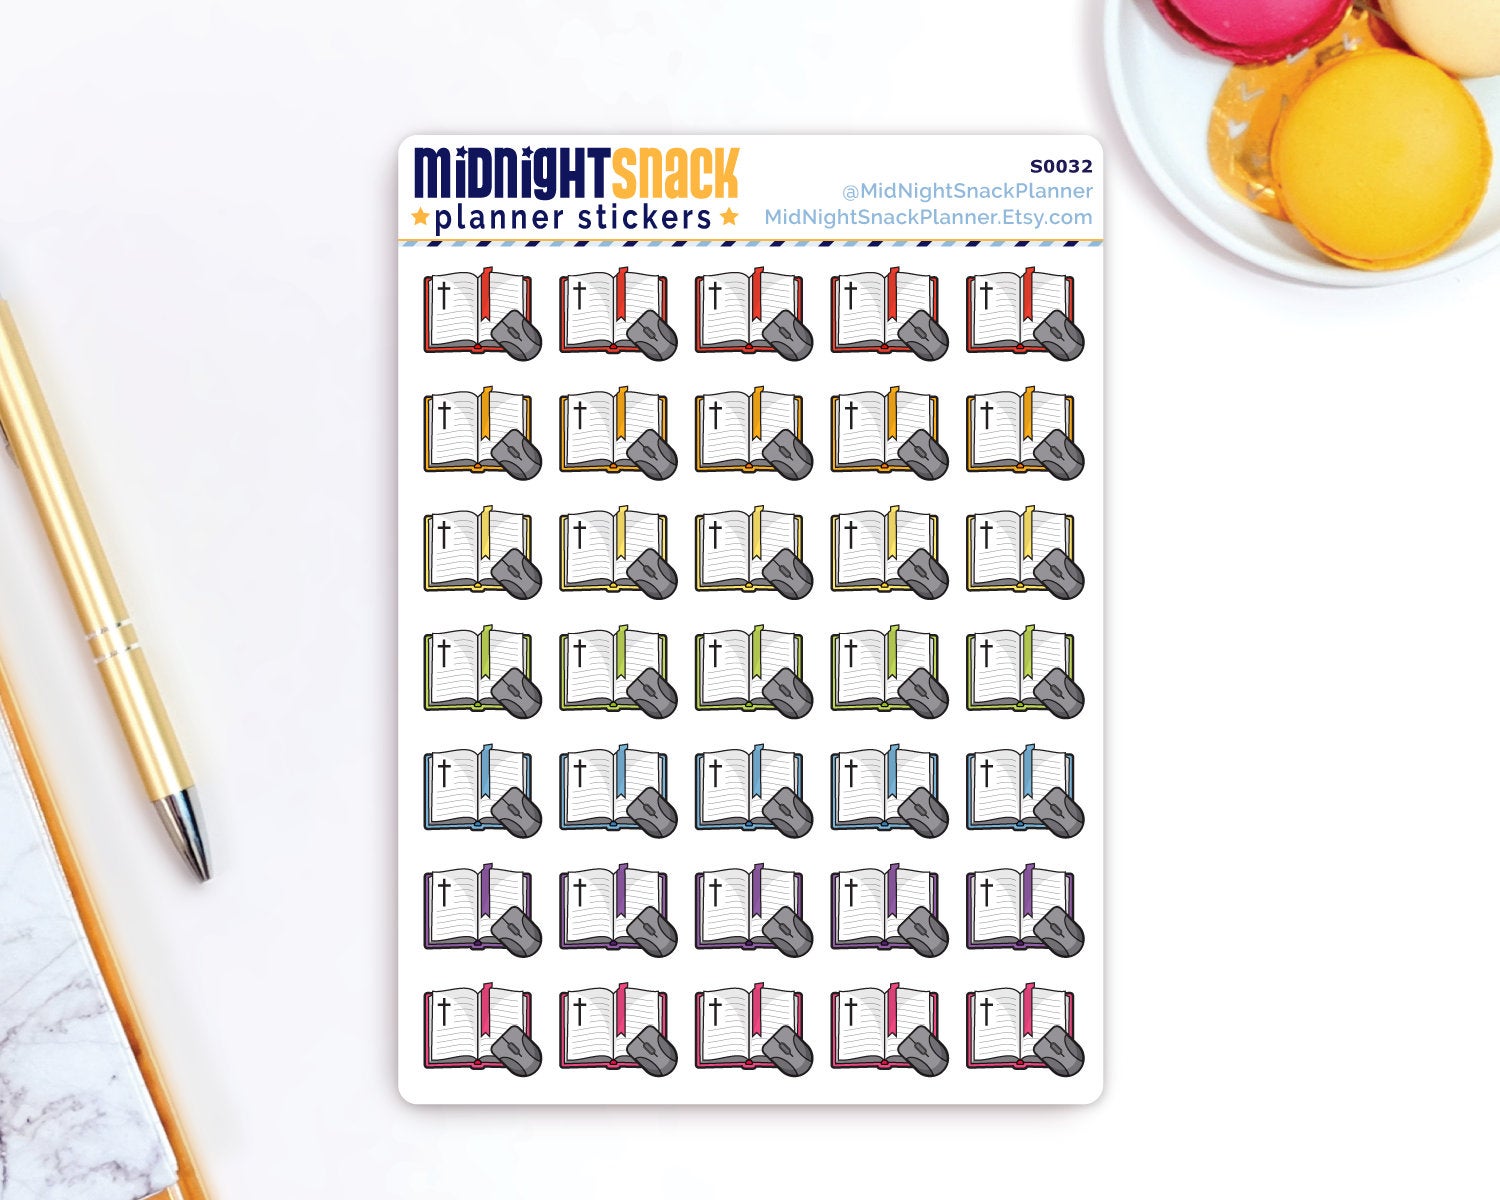 Online Bible Study Icon: Religions Planner Stickers Midnight Snack Planner